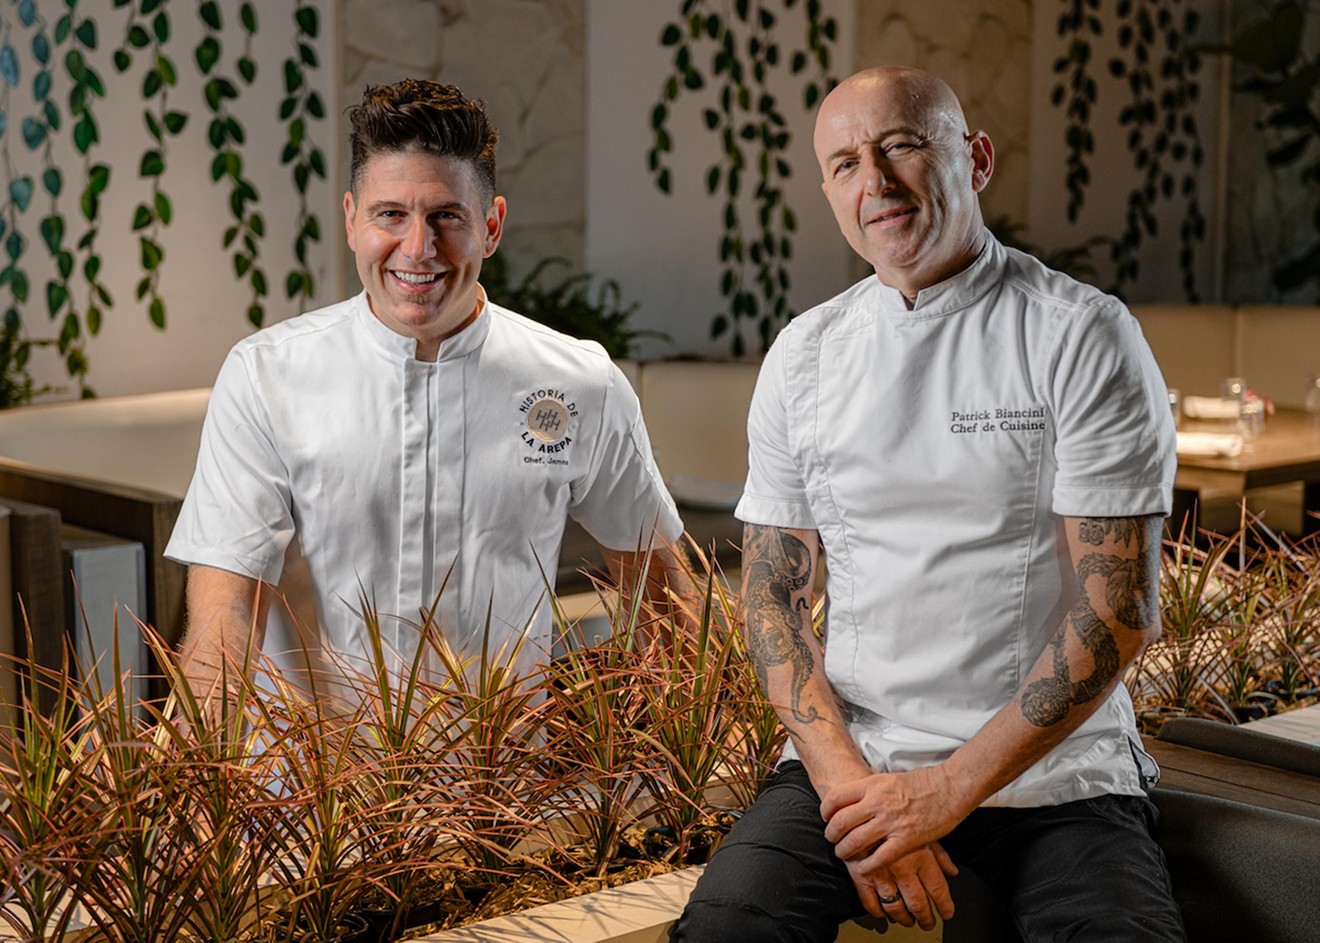 Chef James Tahhan, left, and Patrick Baloup, right, have partnered for La Doña at Sawgrass Mills.